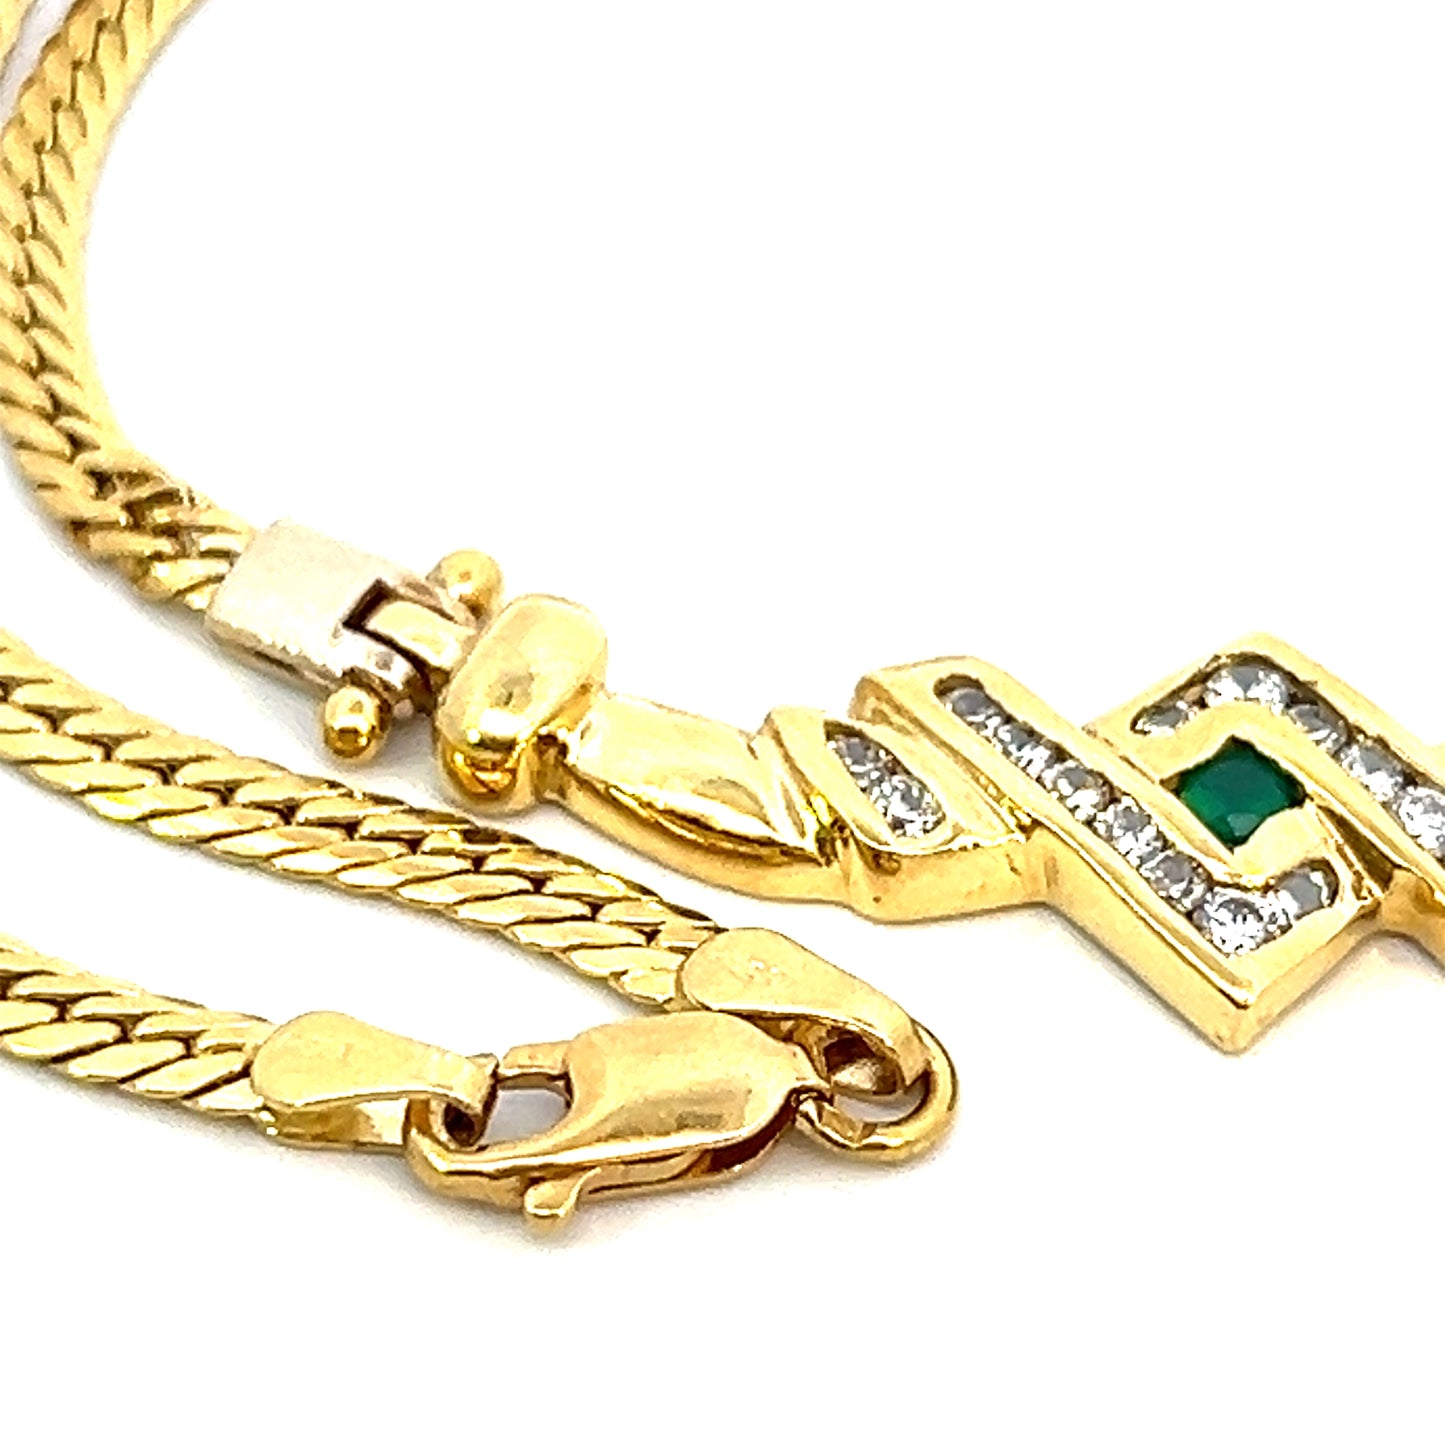 18" Serpentine Necklace with Emerald & White Tourmaline - 18k - Yellow Gold